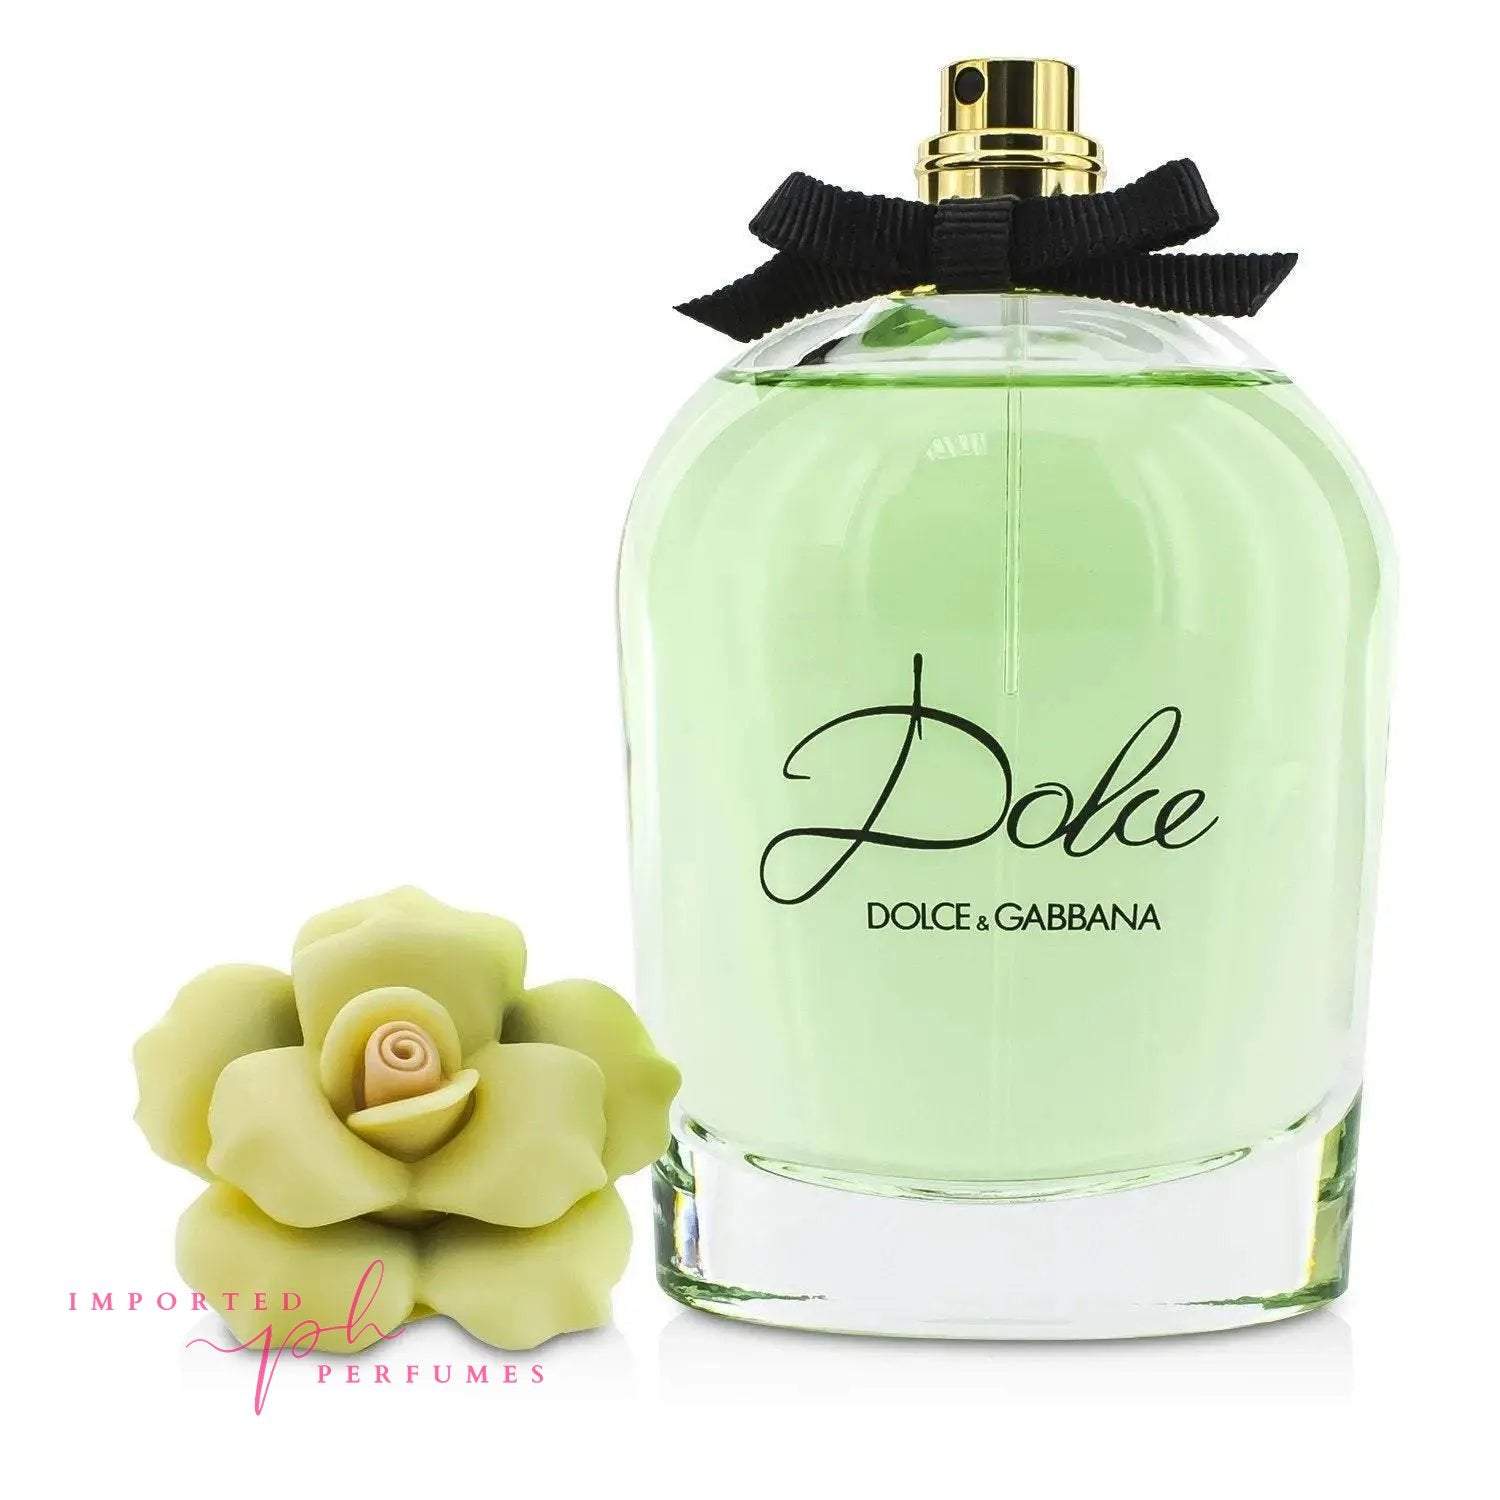 [TESTER] Dolce by Dolce & Gabbana Eau de Parfum For Women 250ml-Imported Perfumes Co-Dolce,Dolce & Gabbana,Dolce by dolce,for women,test,TESTER,women